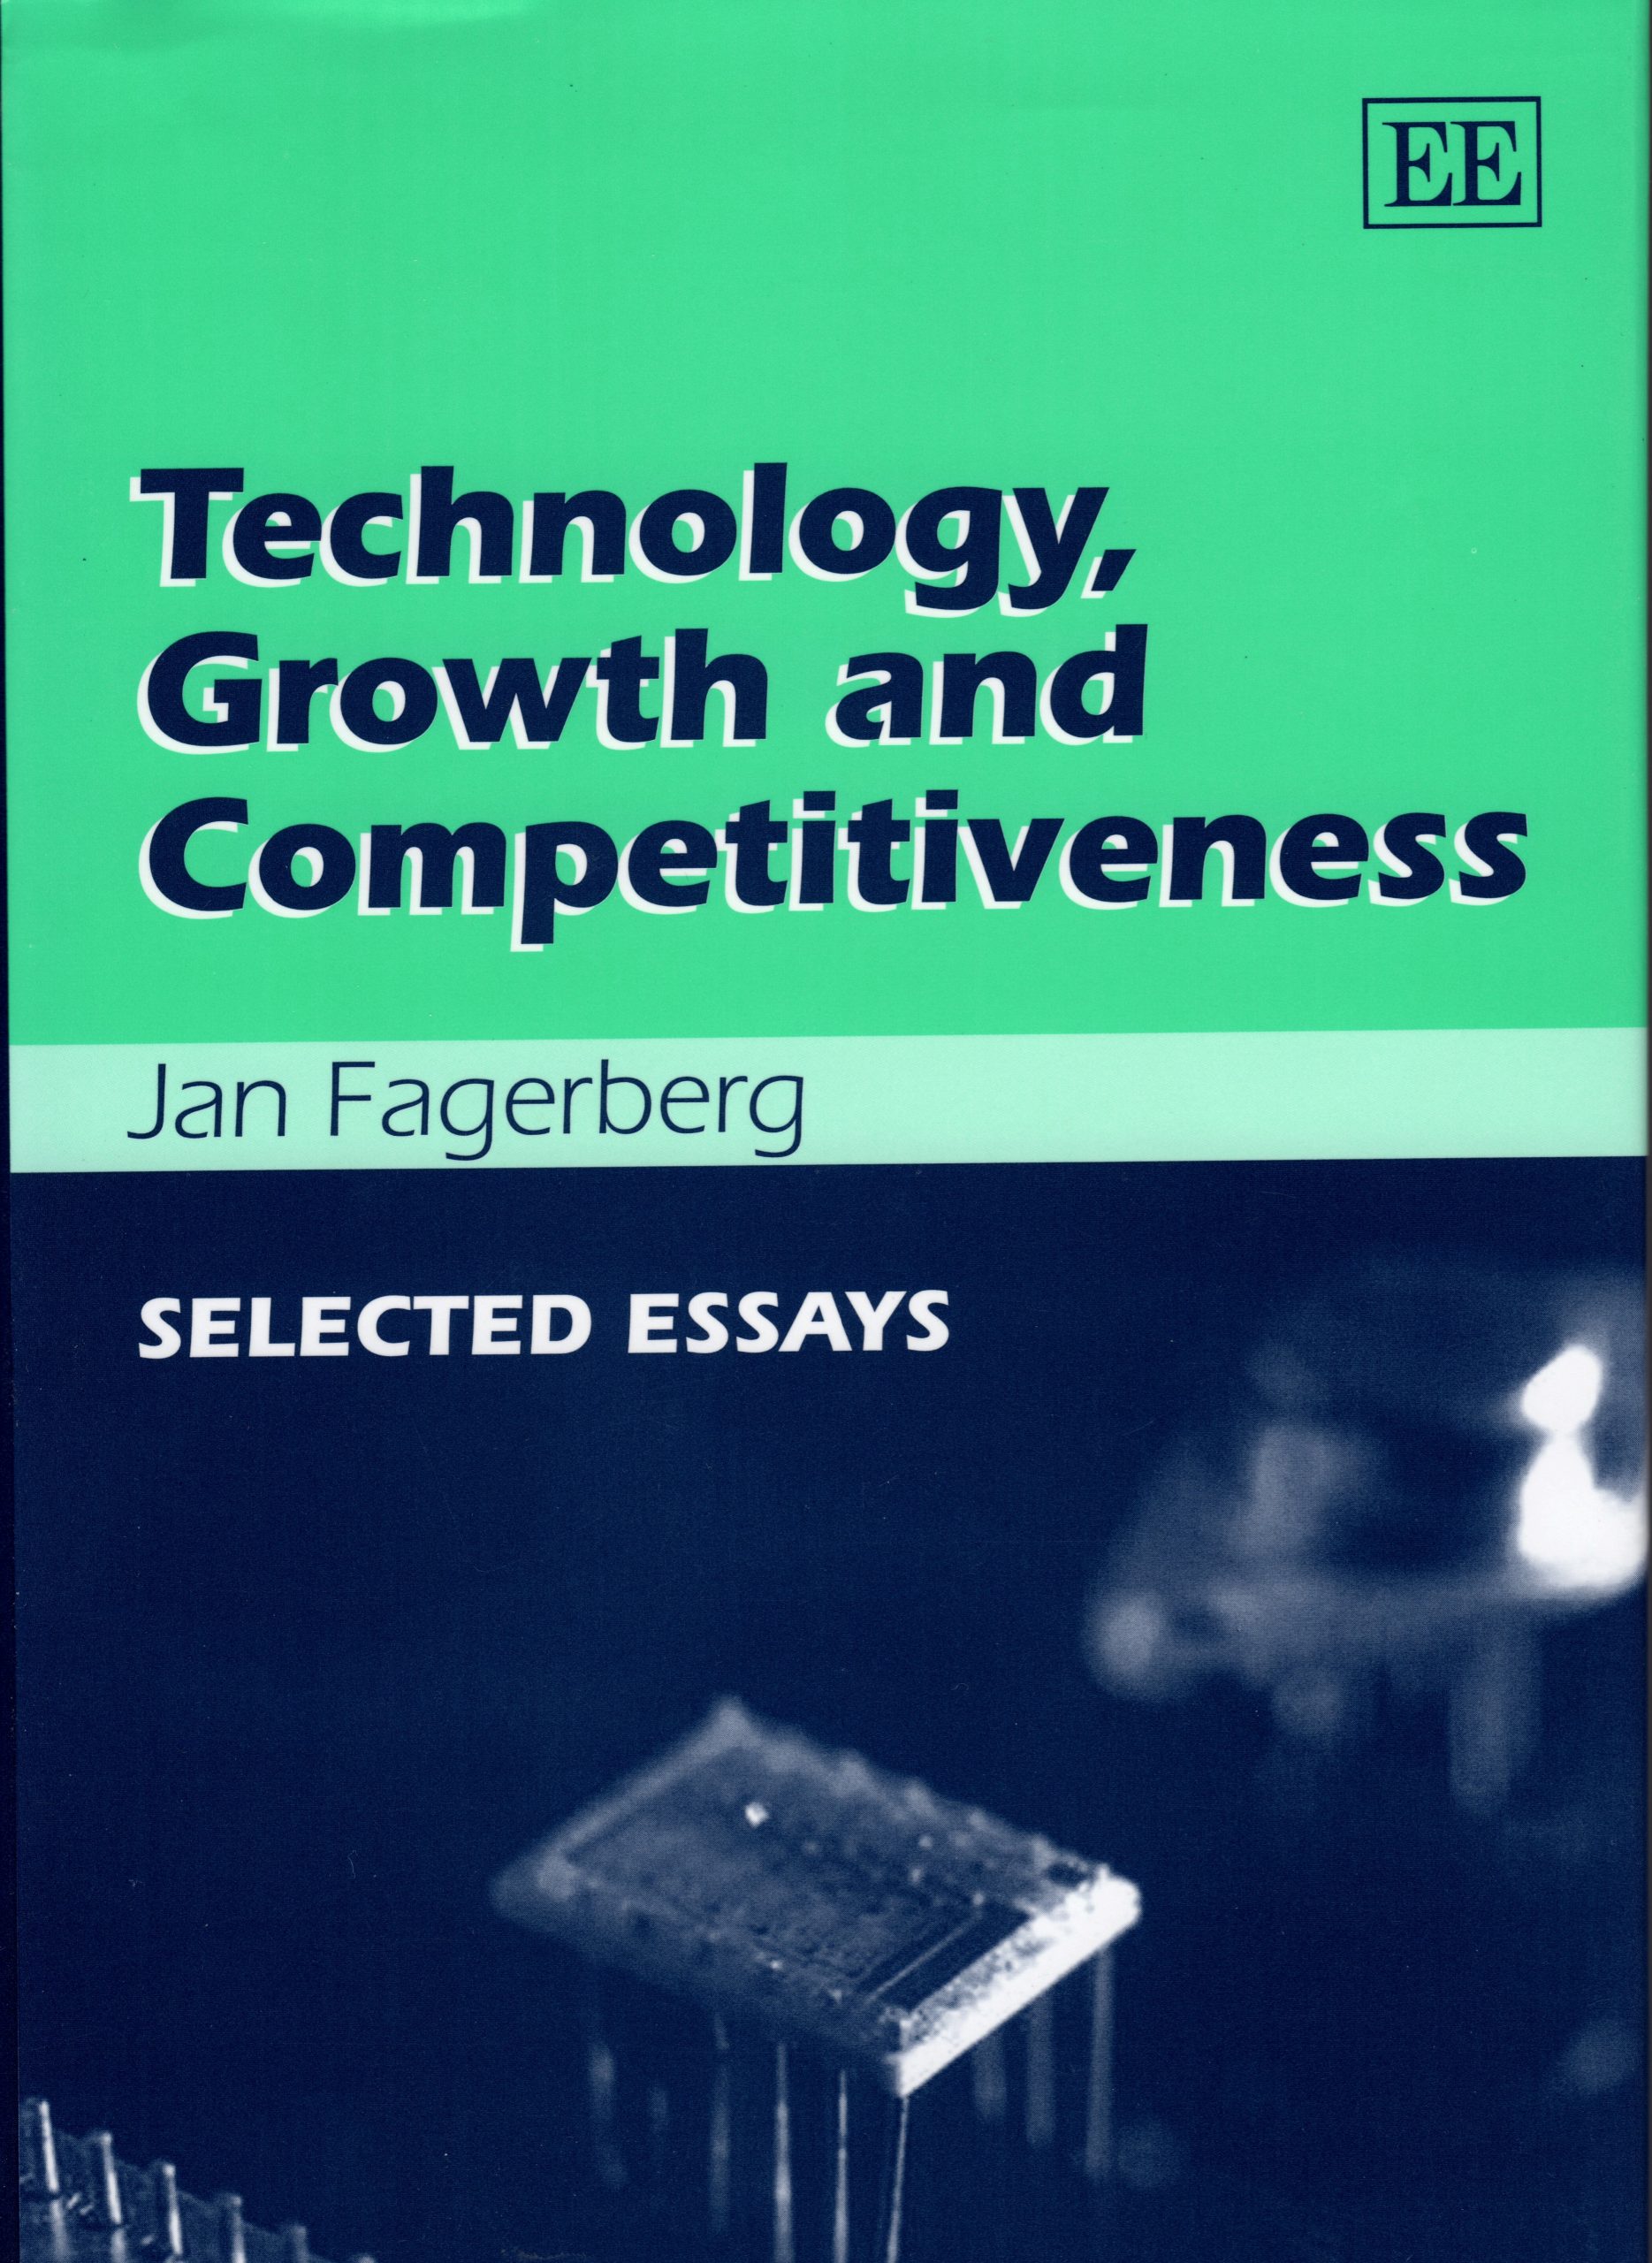 Technology, Growth and Competitiveness, 2002